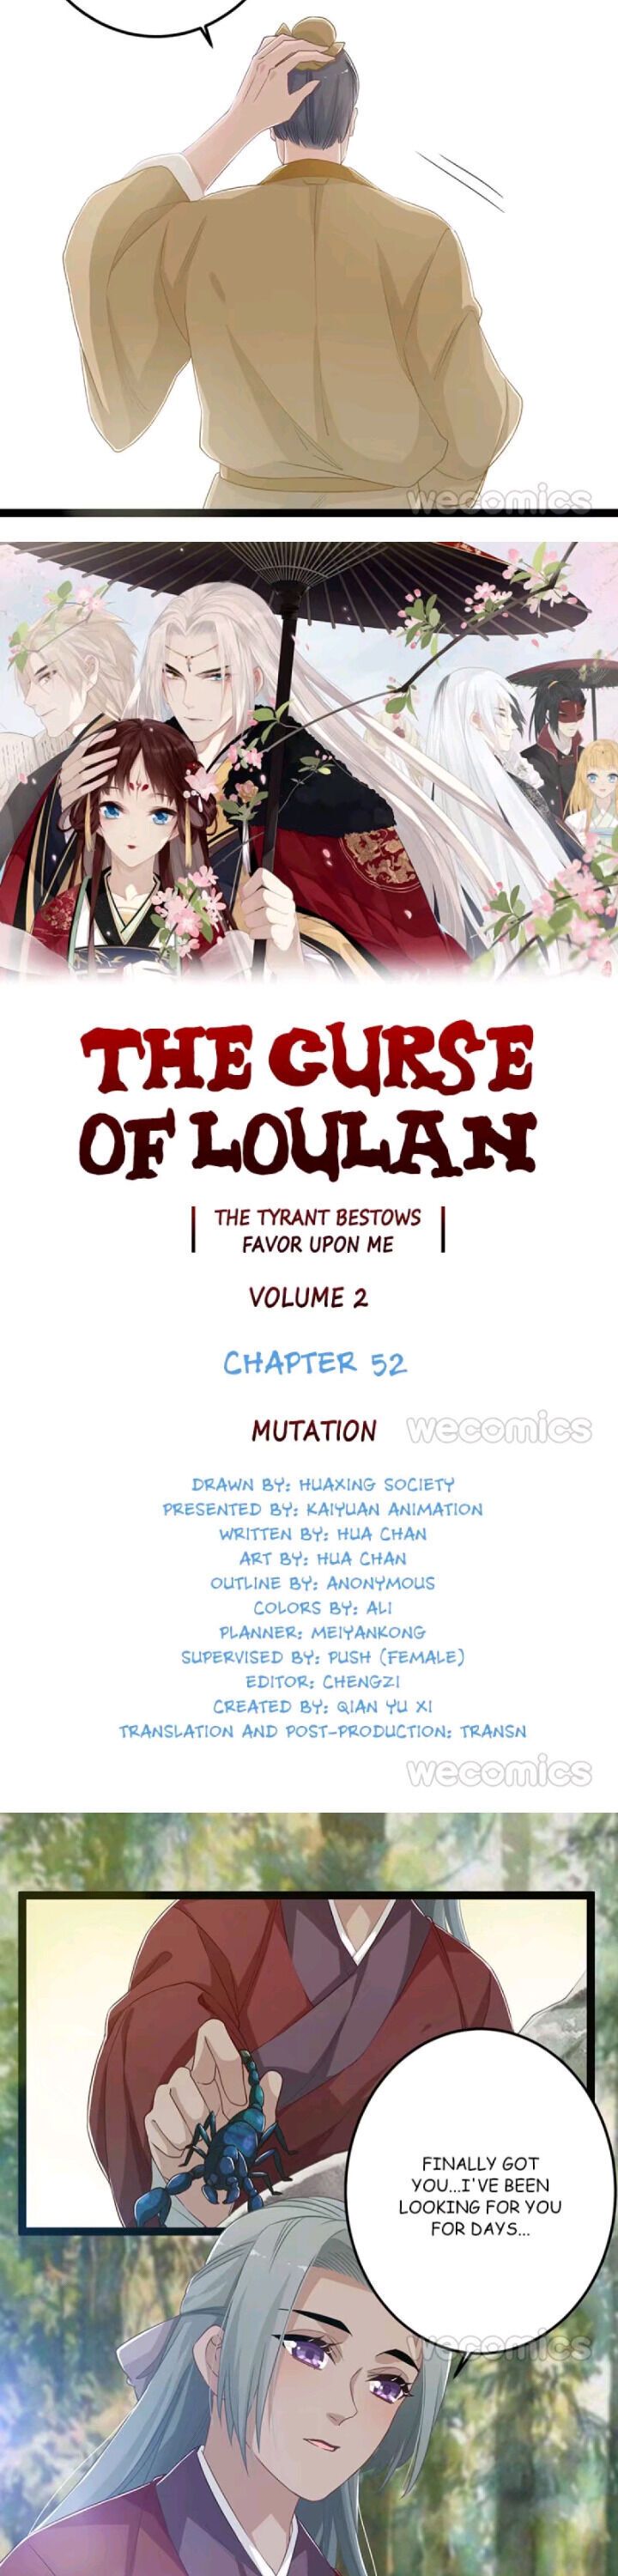 Curse of Loulan: The Tyrant Bestows Favor on Me Chapter 96 page 11